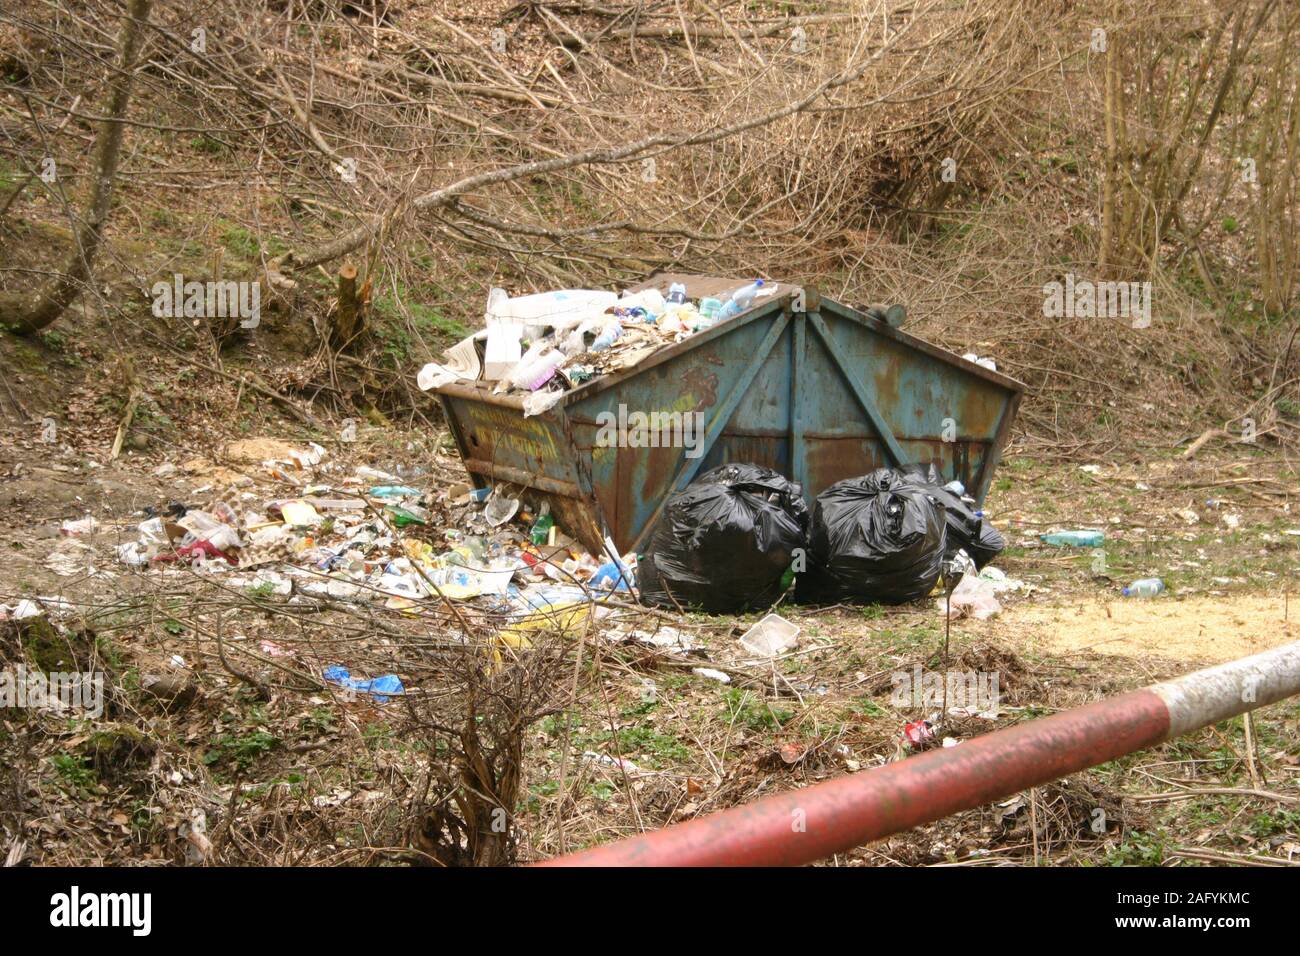 Overfilled trash dumpster from above view Stock Photo by ©mettus 69773429